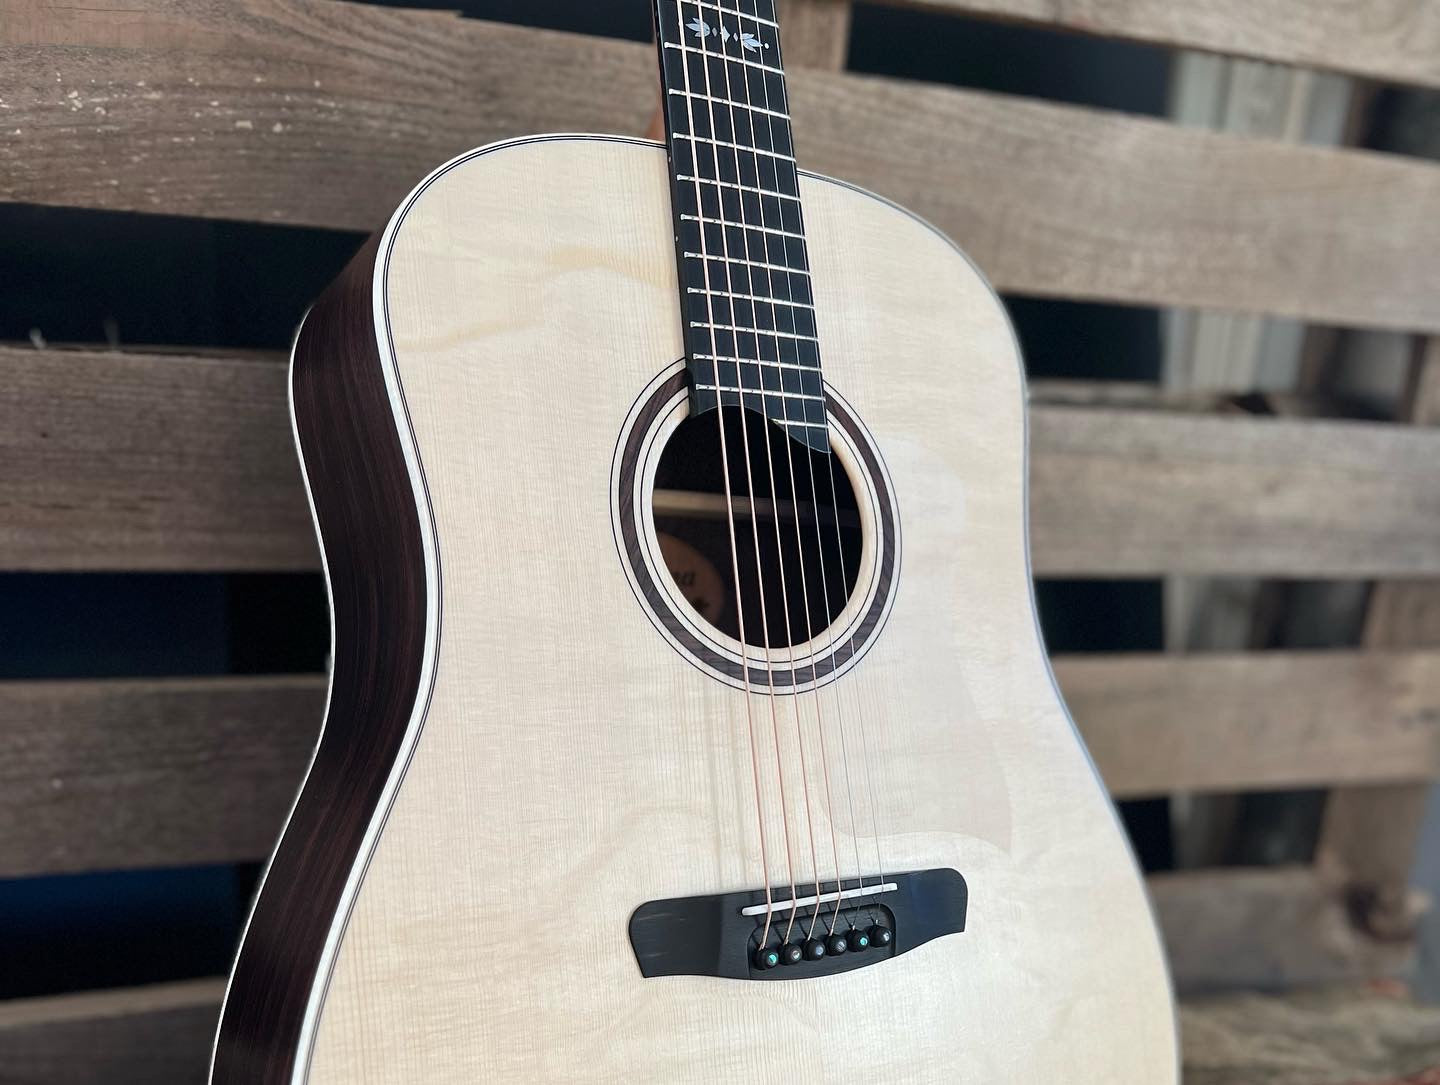 Dowina Moonage Dreadnought Swiss Moon Spruce & Rosewood Time Traveller Series, Acoustic Guitar for sale at Richards Guitars.